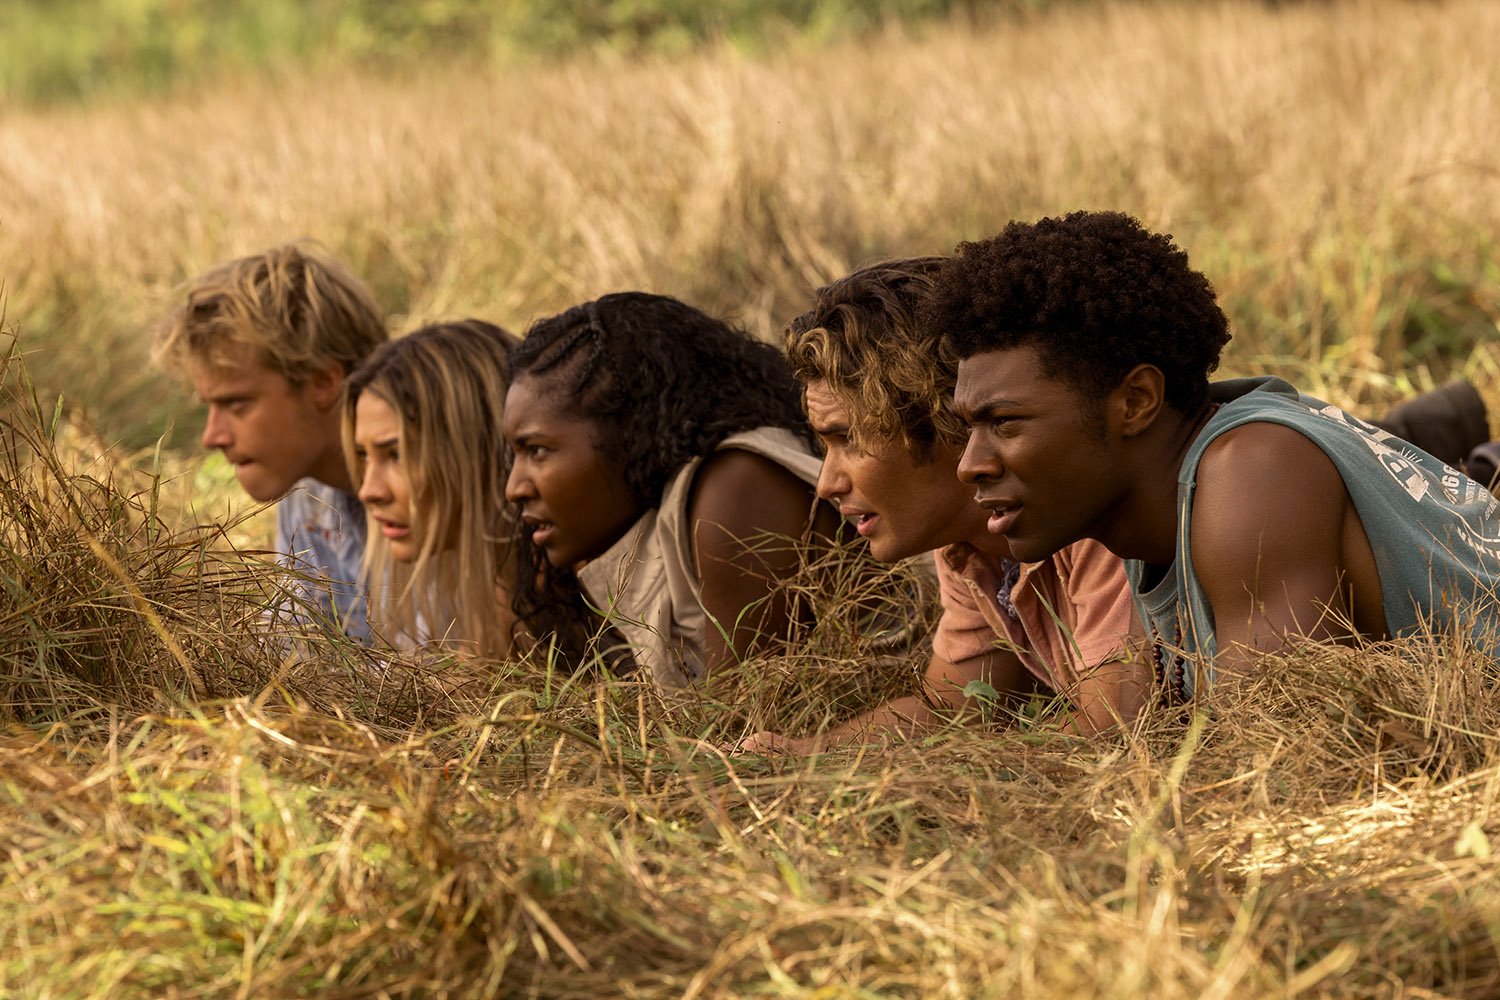 Outer Banks Season 3 photo shows Rudy Pankow as JJ, Madelyn Cline as Sarah Cameron, Carlacia Grant as Cleo, Chase Stokes as John B, and Jonathan Daviss as Pope hiding in the grass